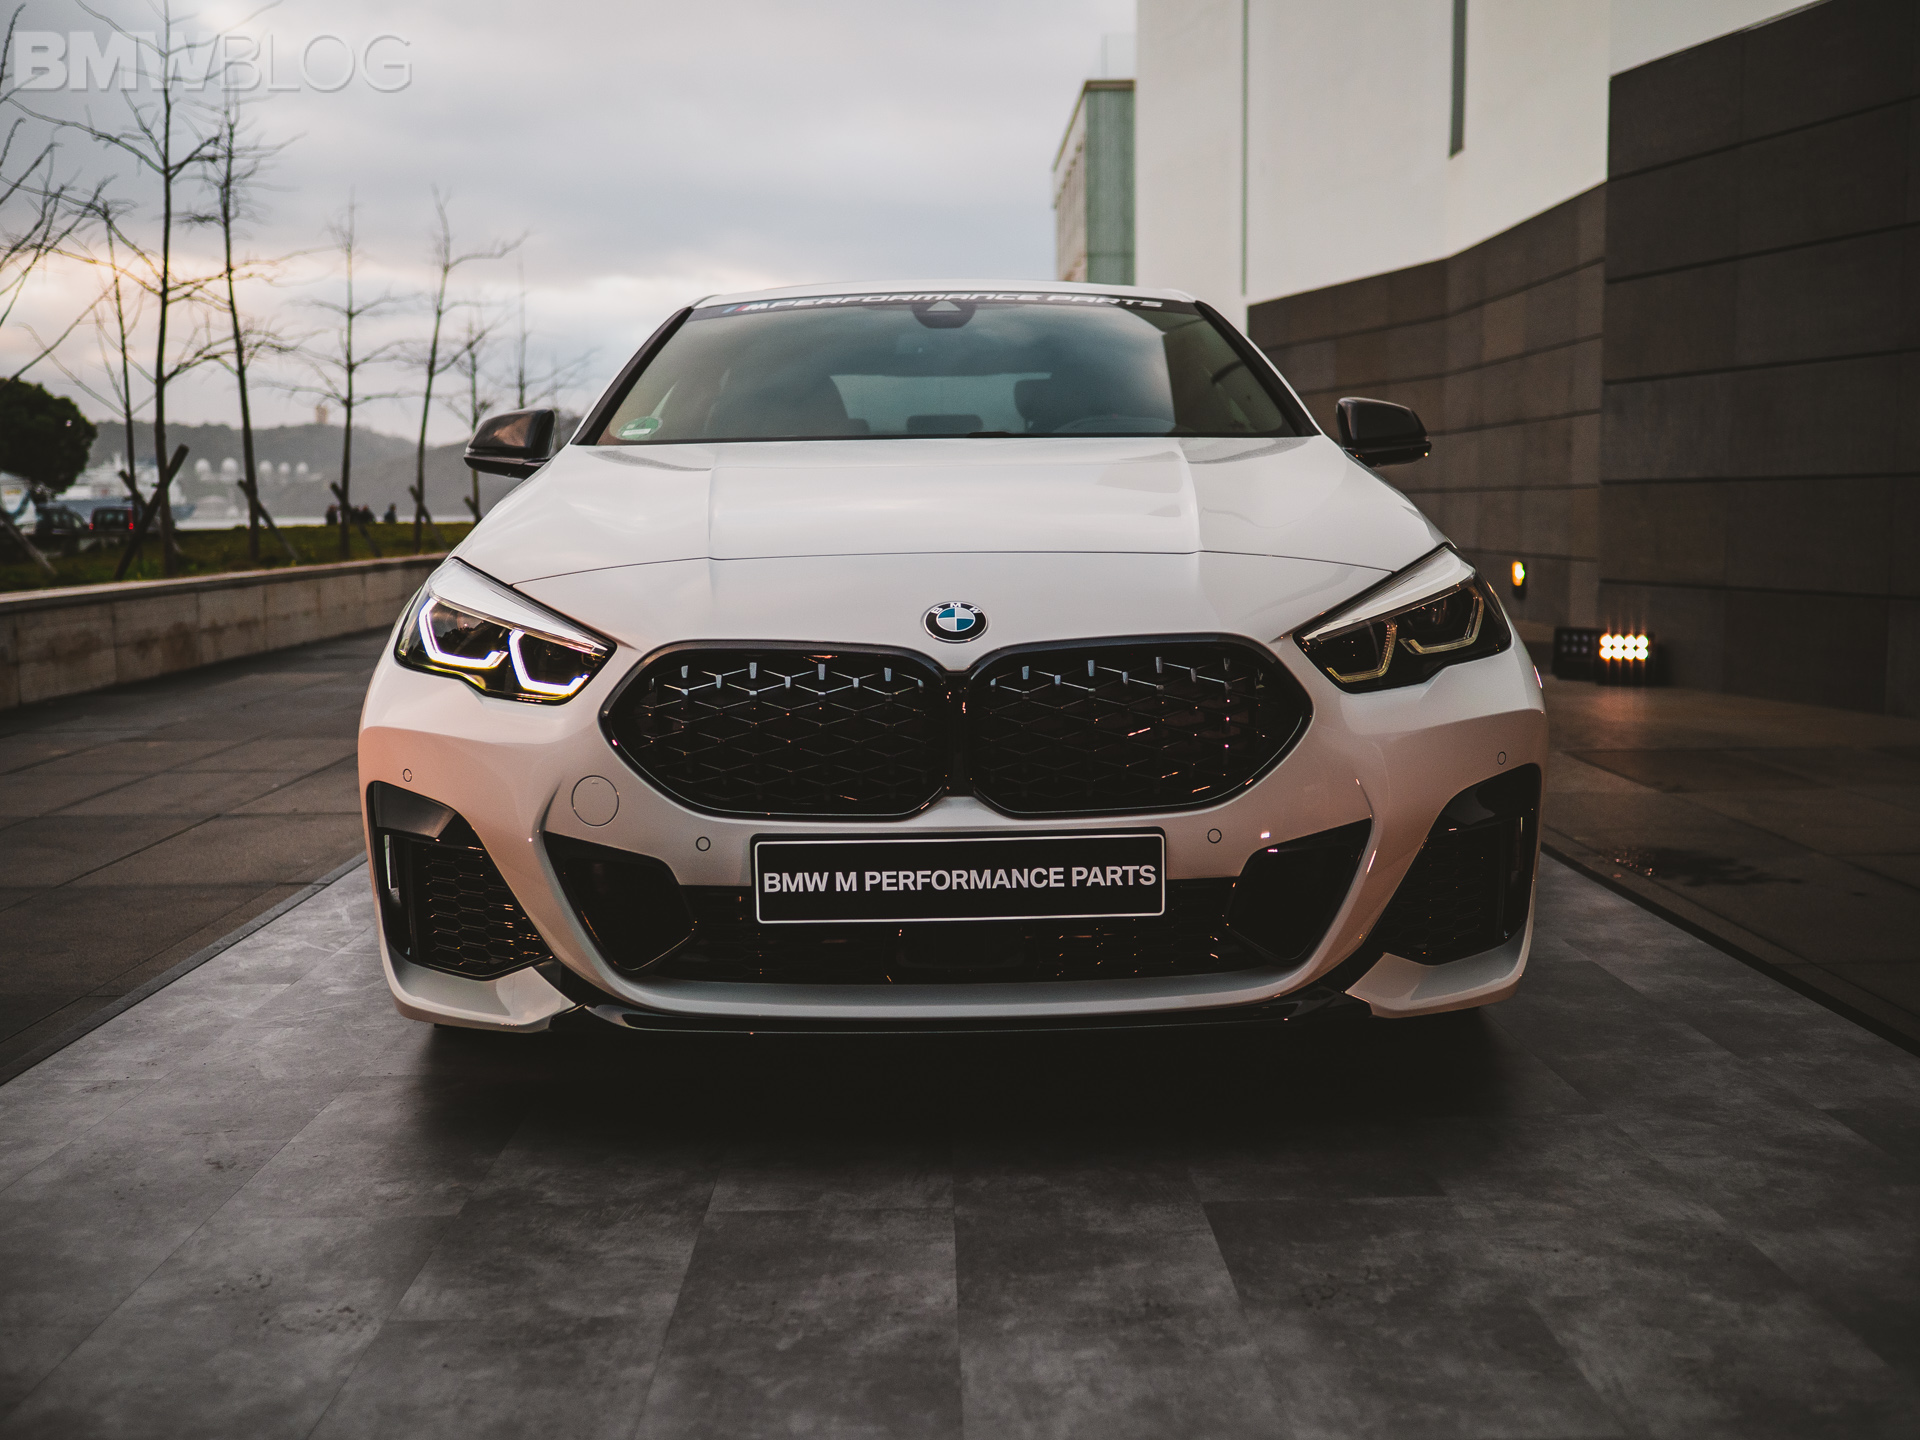 BMW 2 Series Gran Coupe images 11